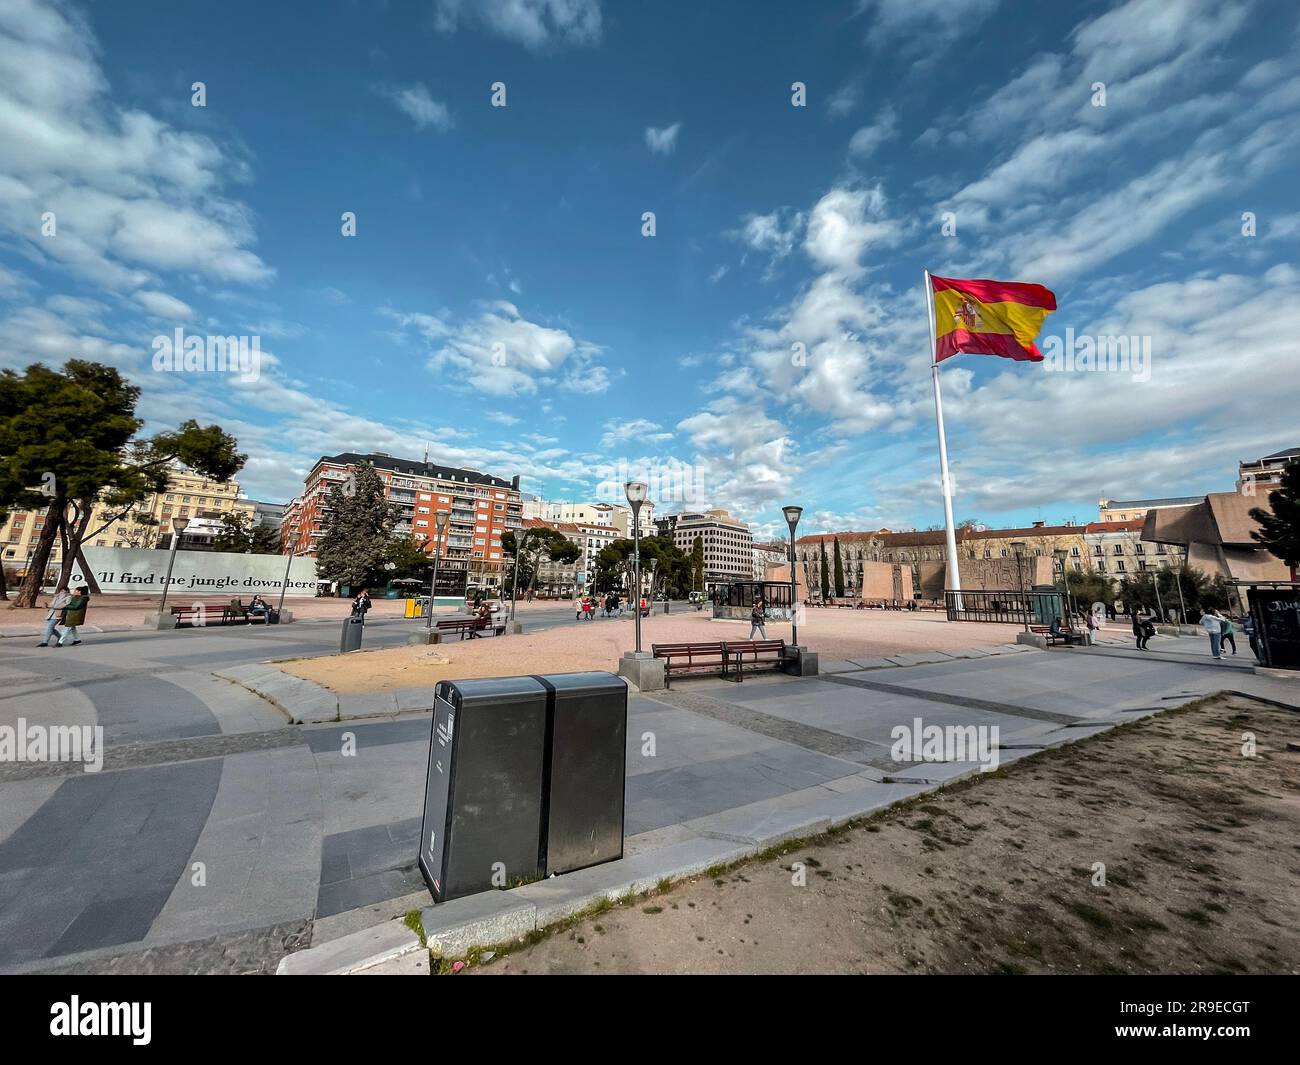 Madrid, Spain - FEB 19, 2022: Plaza de Colon, Columbus Square, is located in the encounter of Chamberi, Centro and Salamanca districts of Madrid, Spai Stock Photo